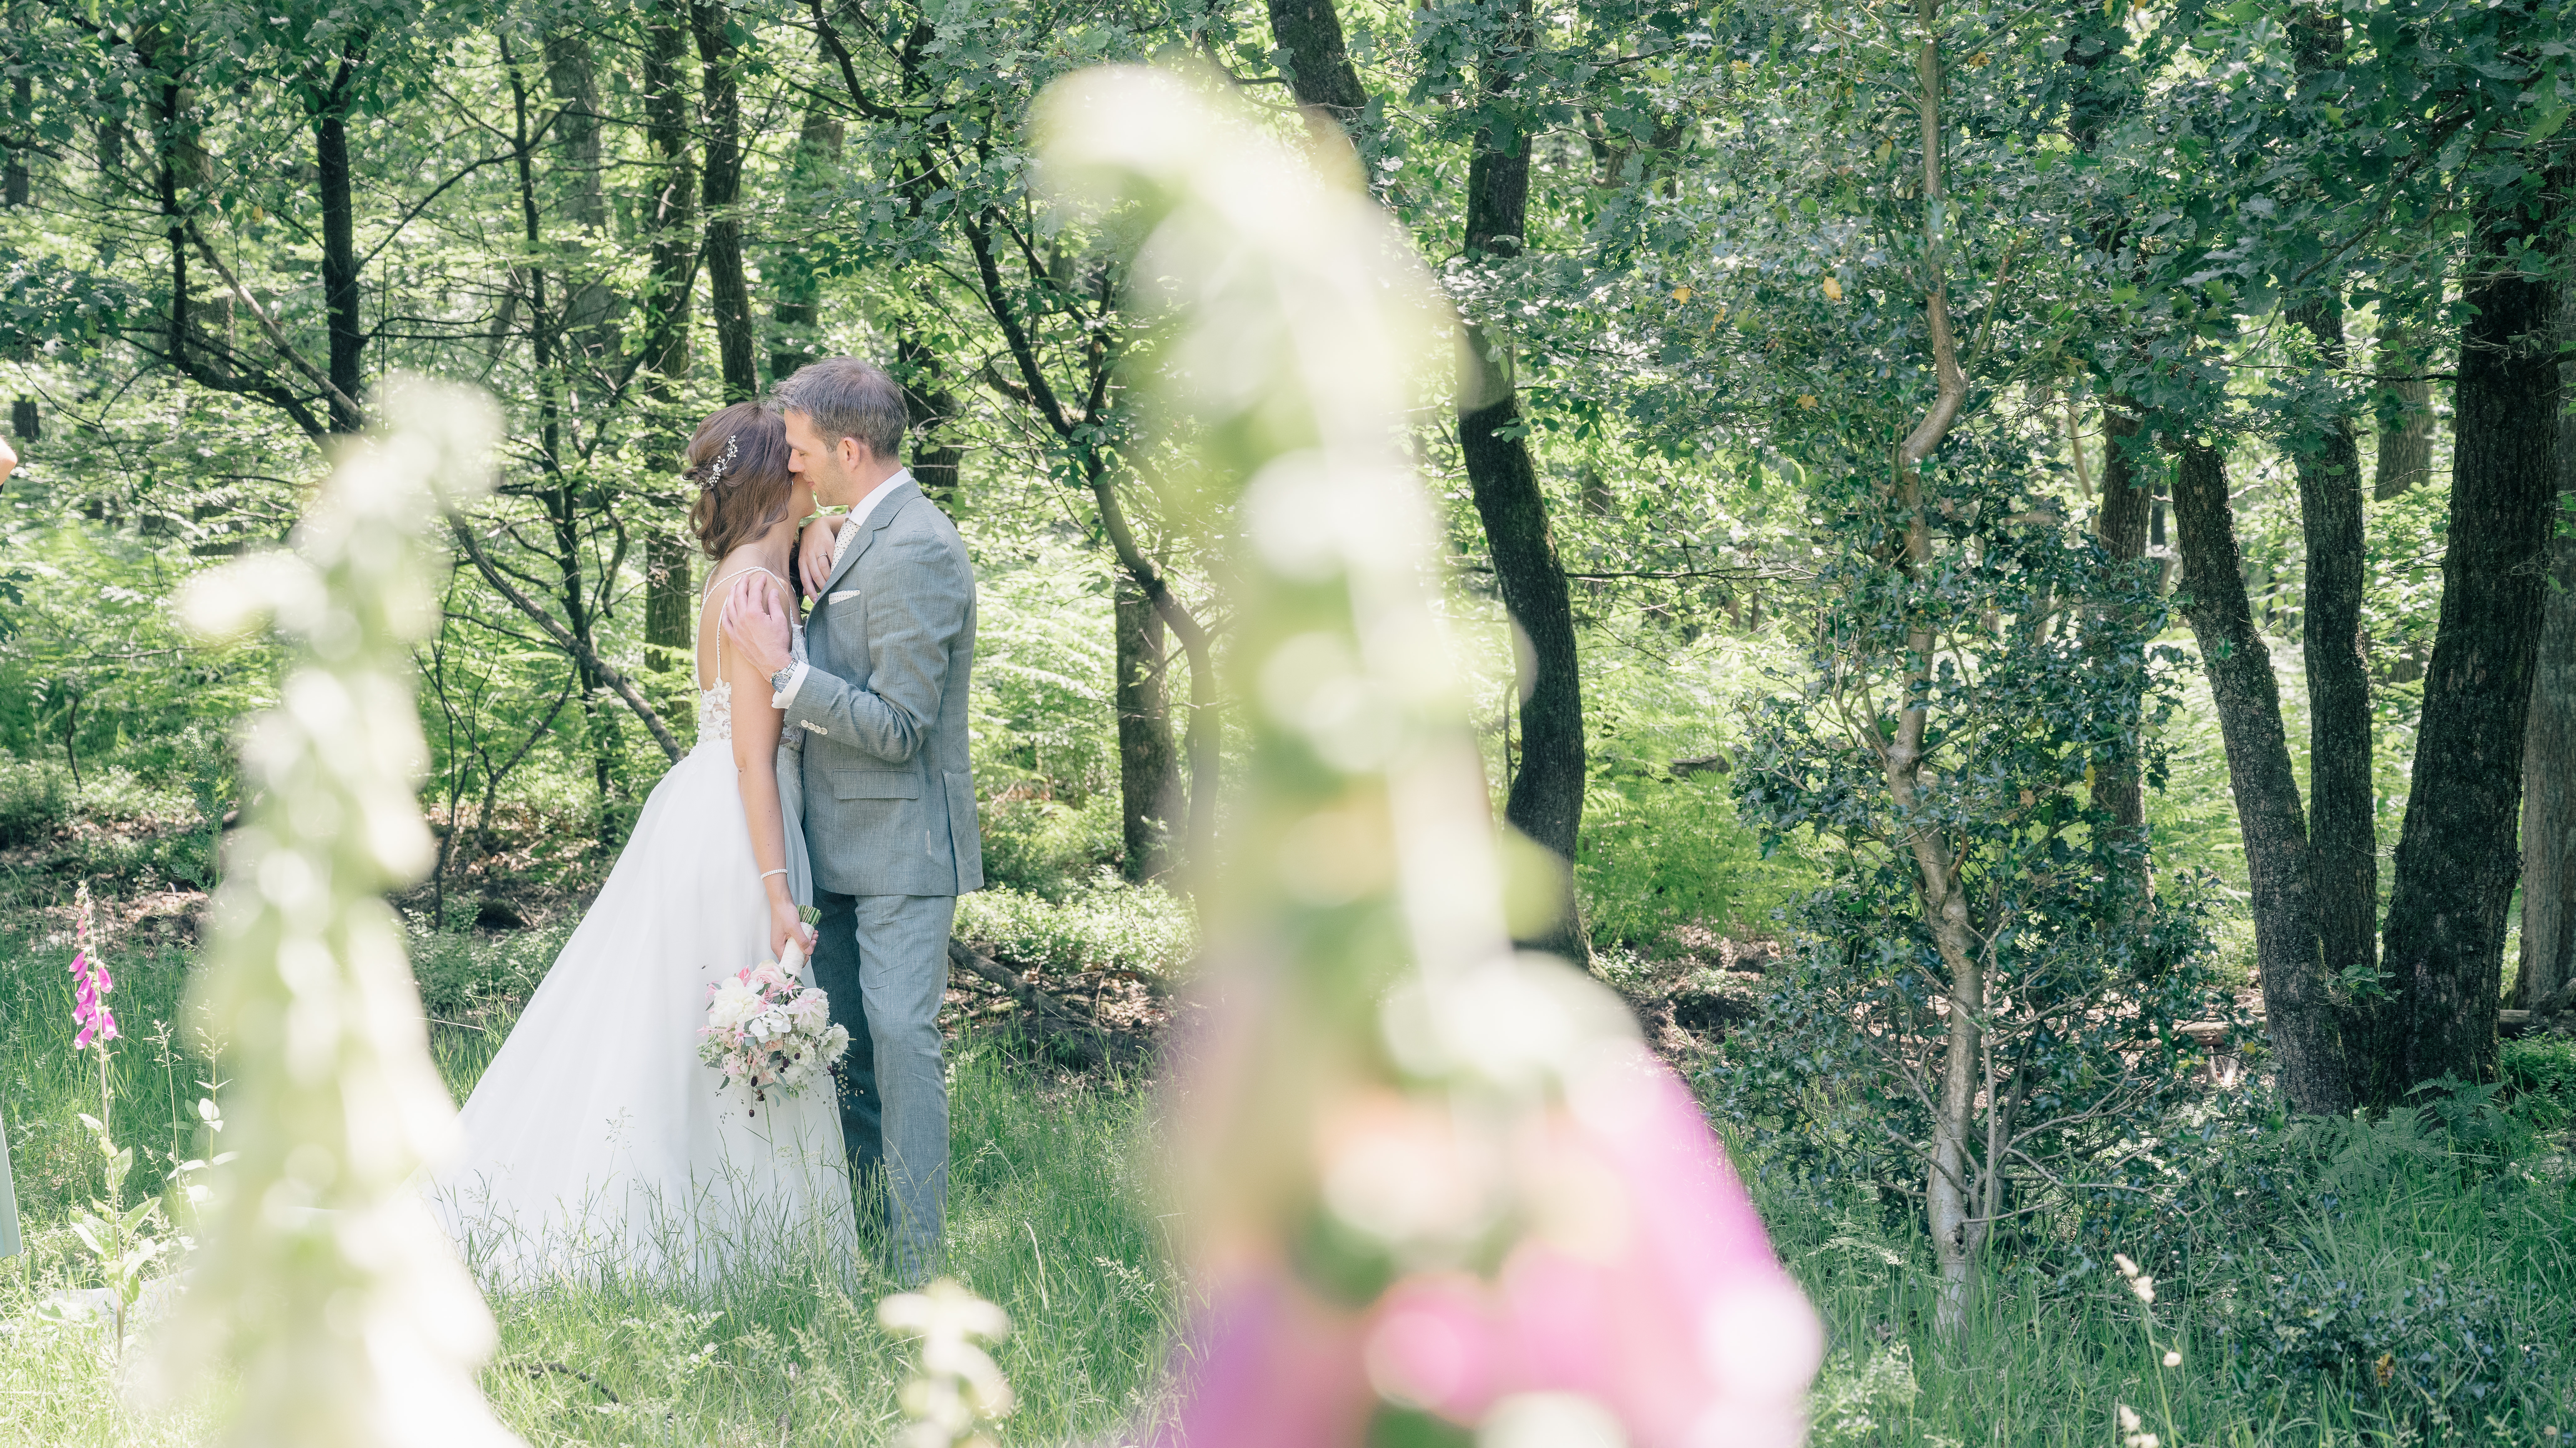 Choosing a wedding photographer can be a challenge - will you be happy standing in the woods for your bridal portraits like this couple? 